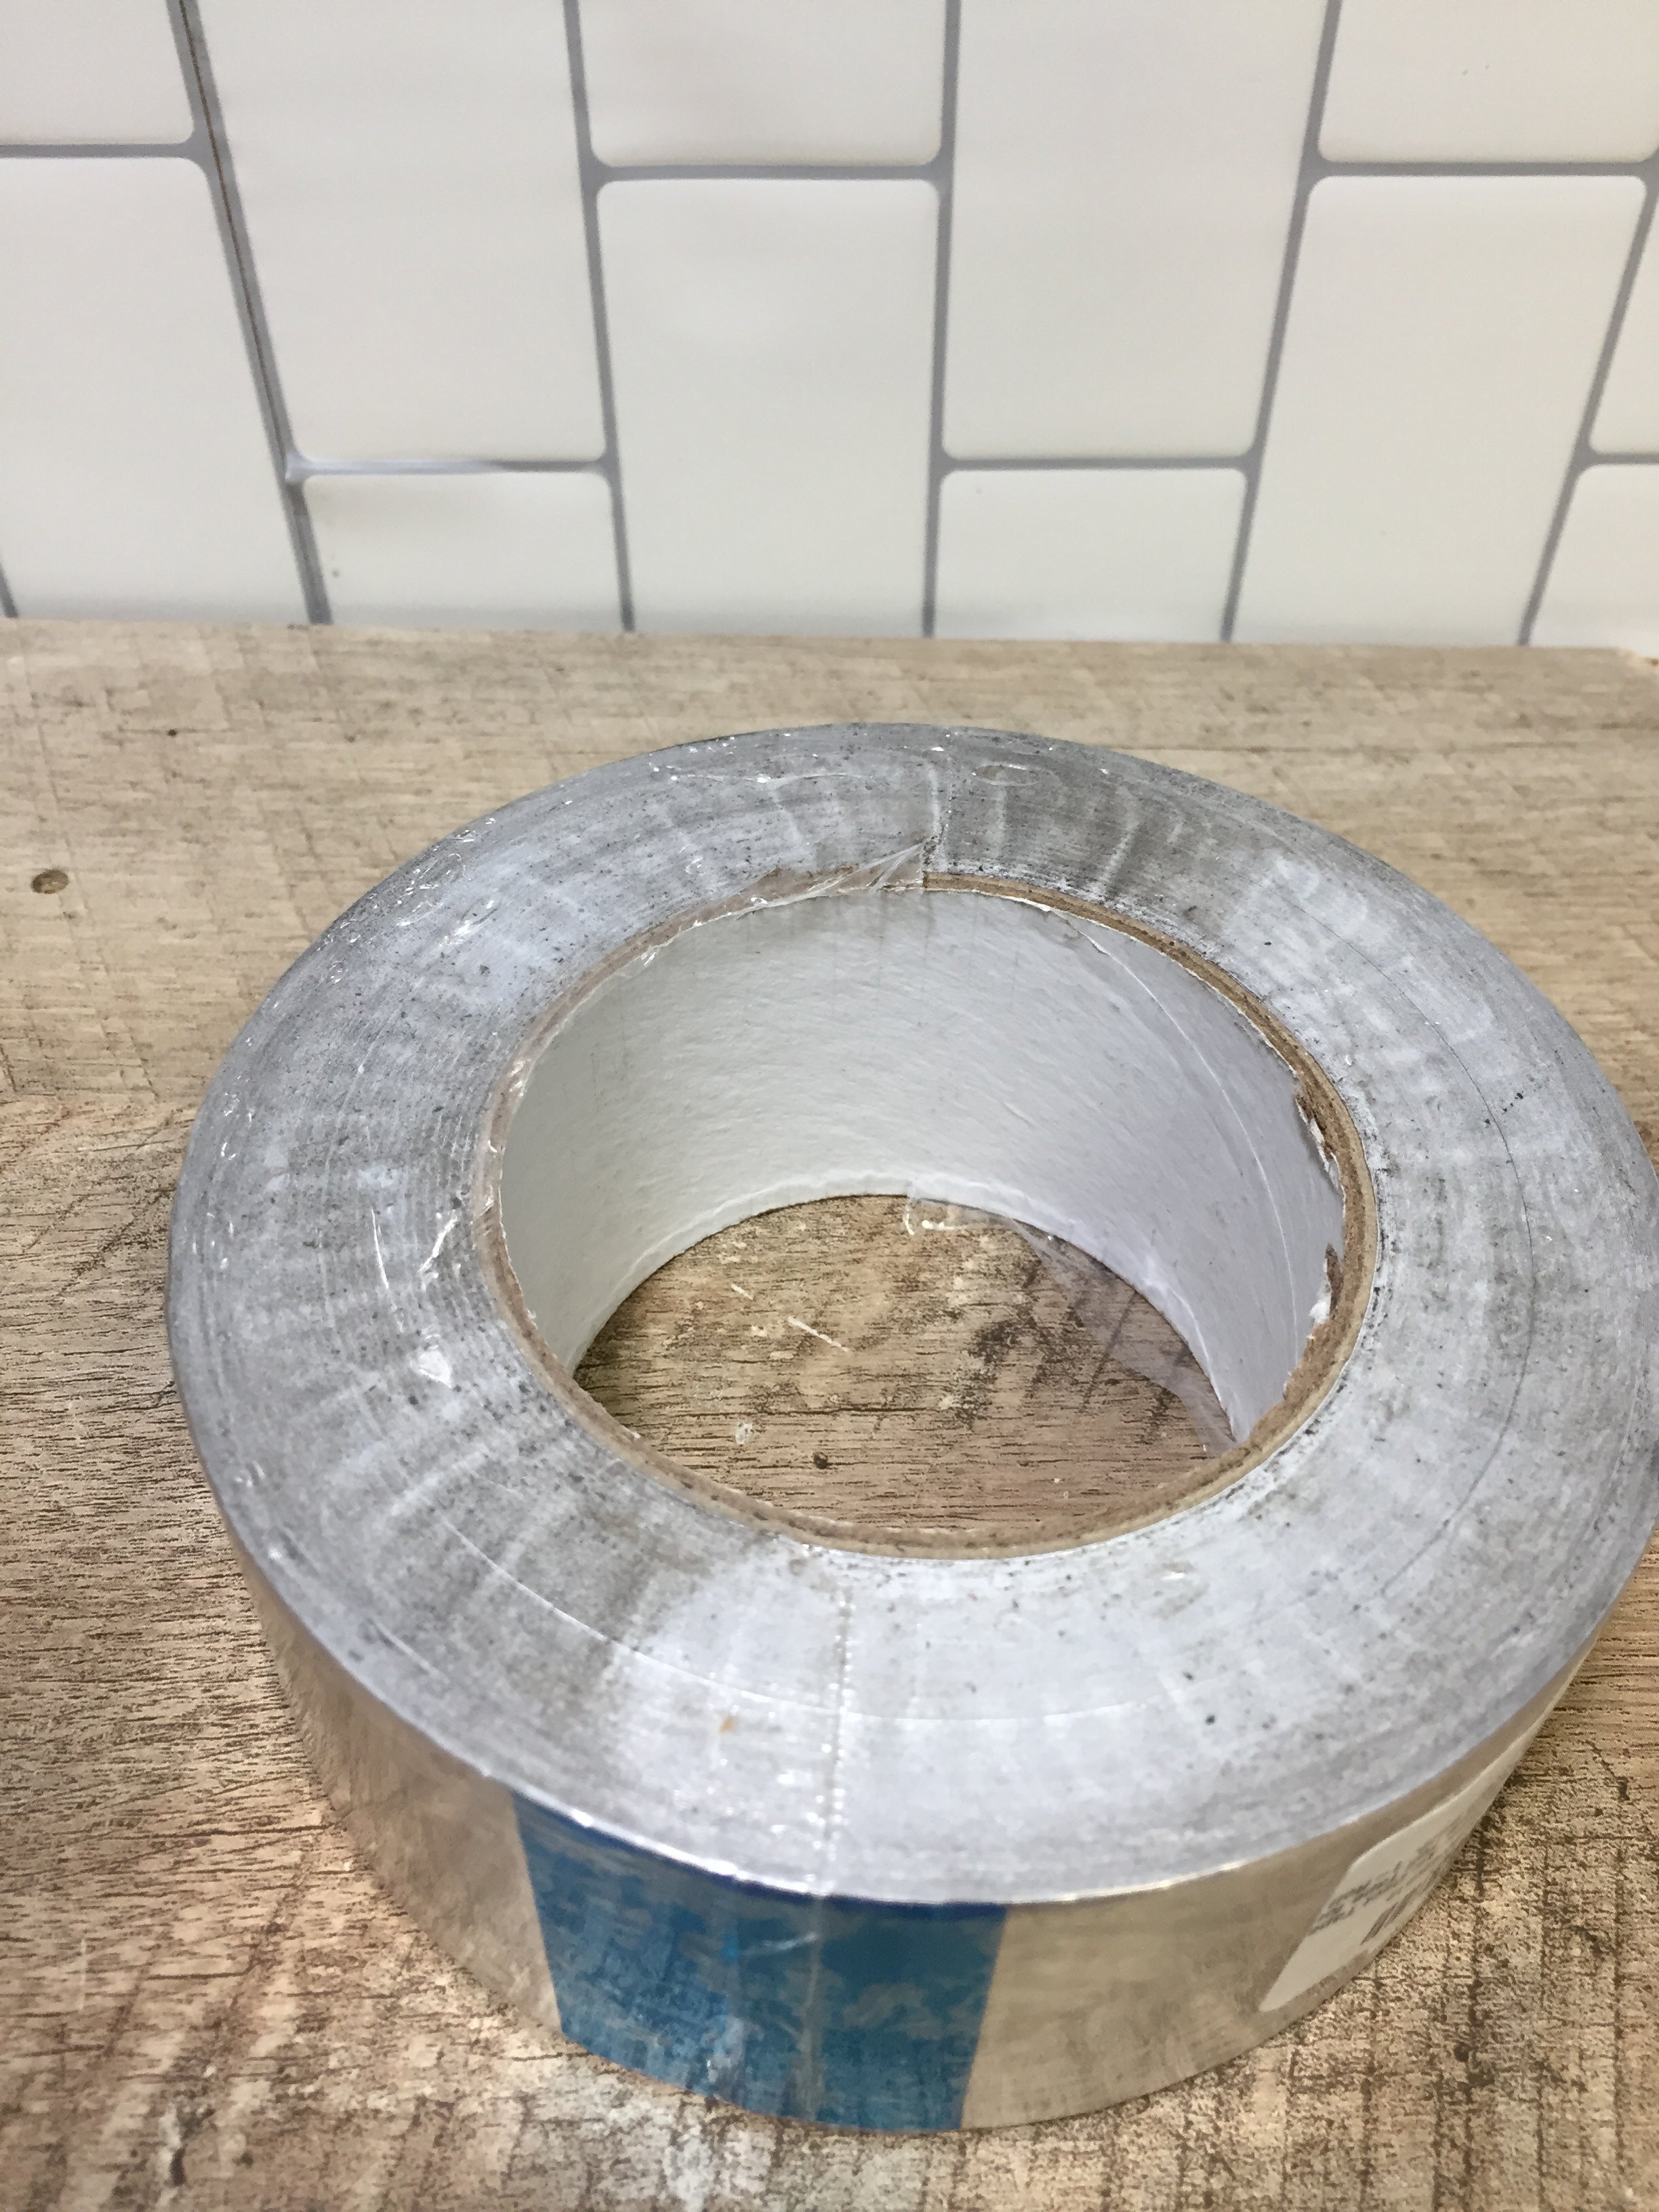 Professional Adhesive Aluminum Foil Tape for HVAC, Pipe, 2in x 55Yard- 1-Roll (7199930286318)